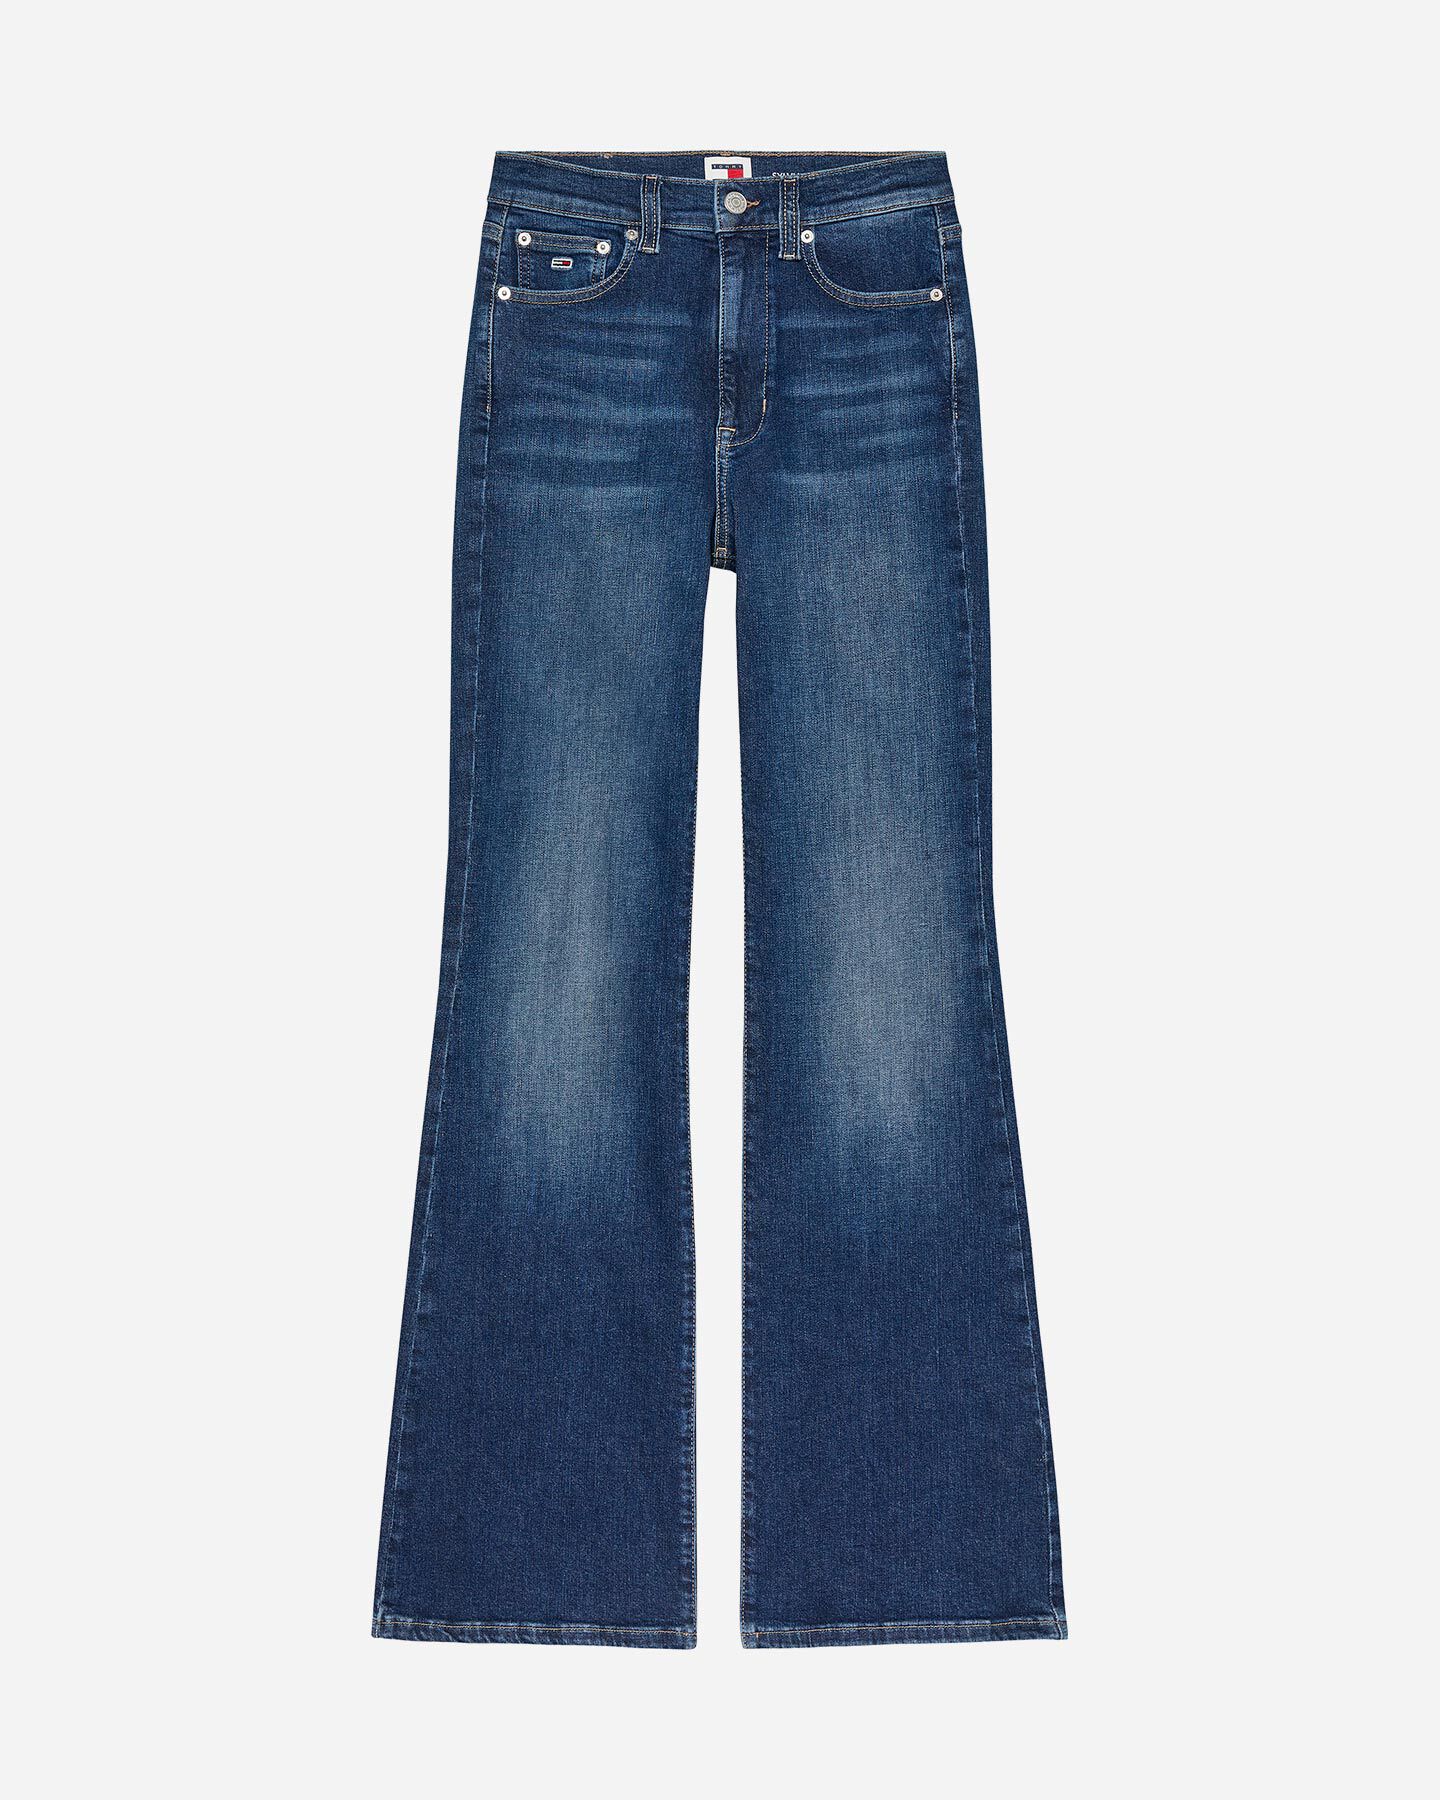  Jeans TOMMY HILFIGER SYLVIA L32 BOOTCUT W S5686211|UNI|32/28 scatto 0